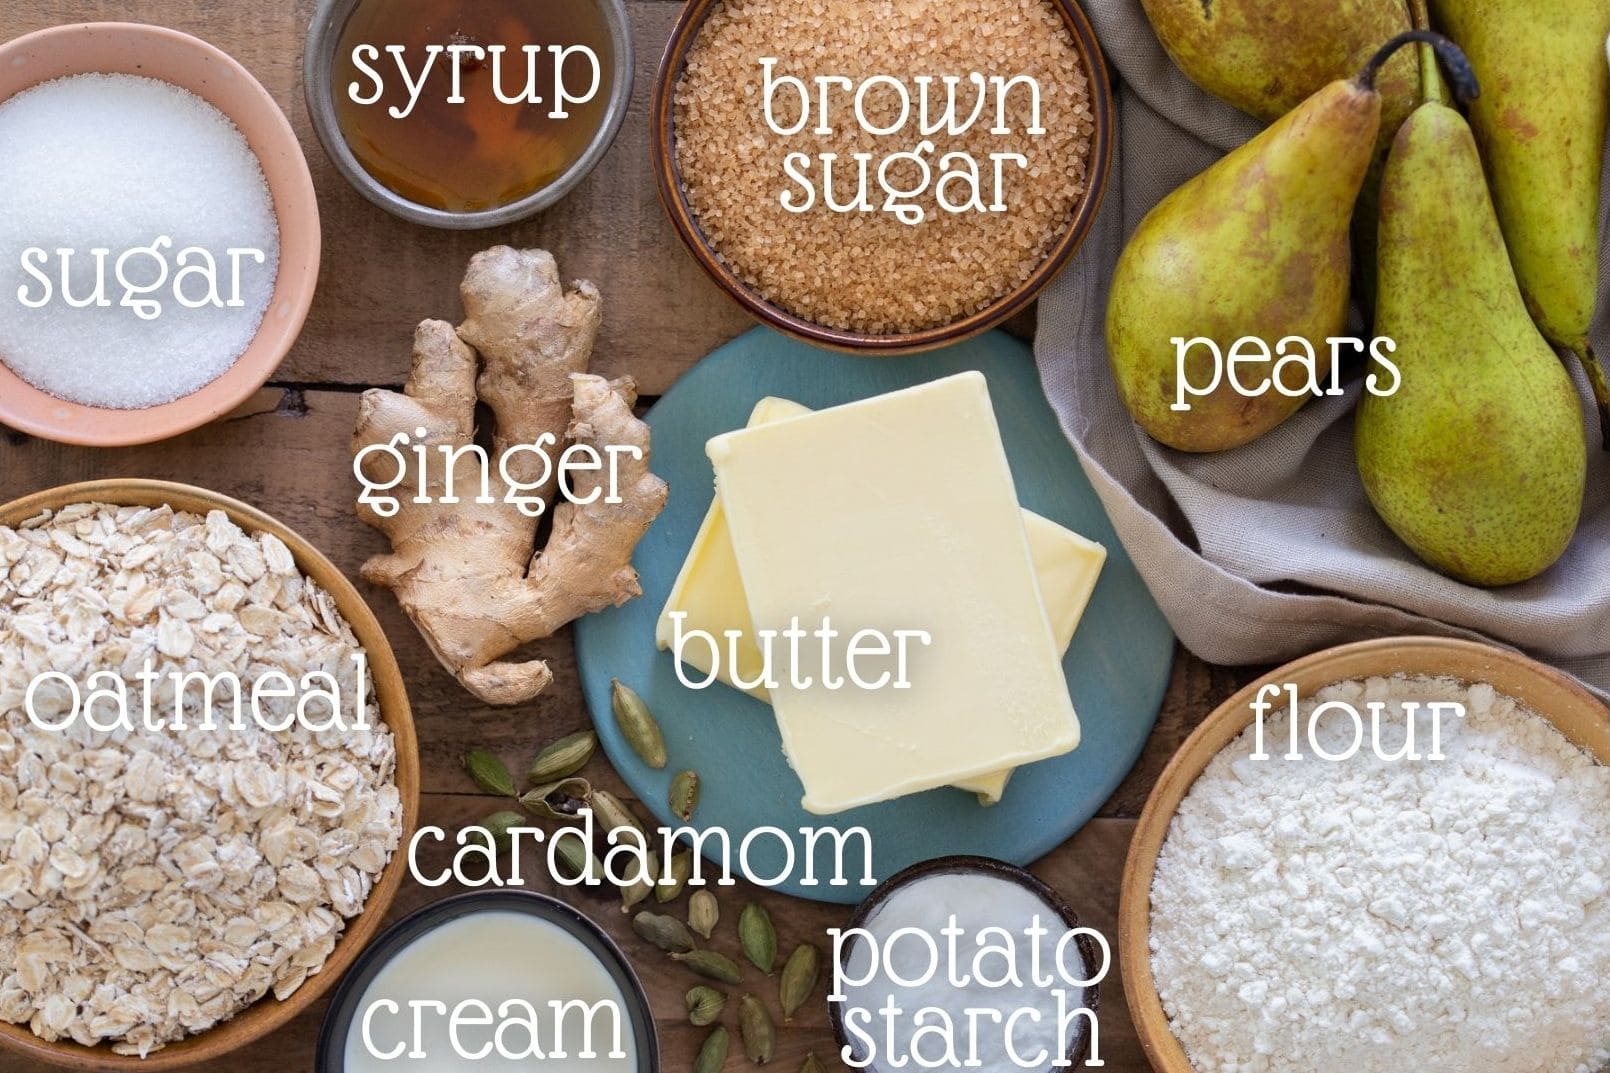 Overhead image of the ingredients needed in the recipe.